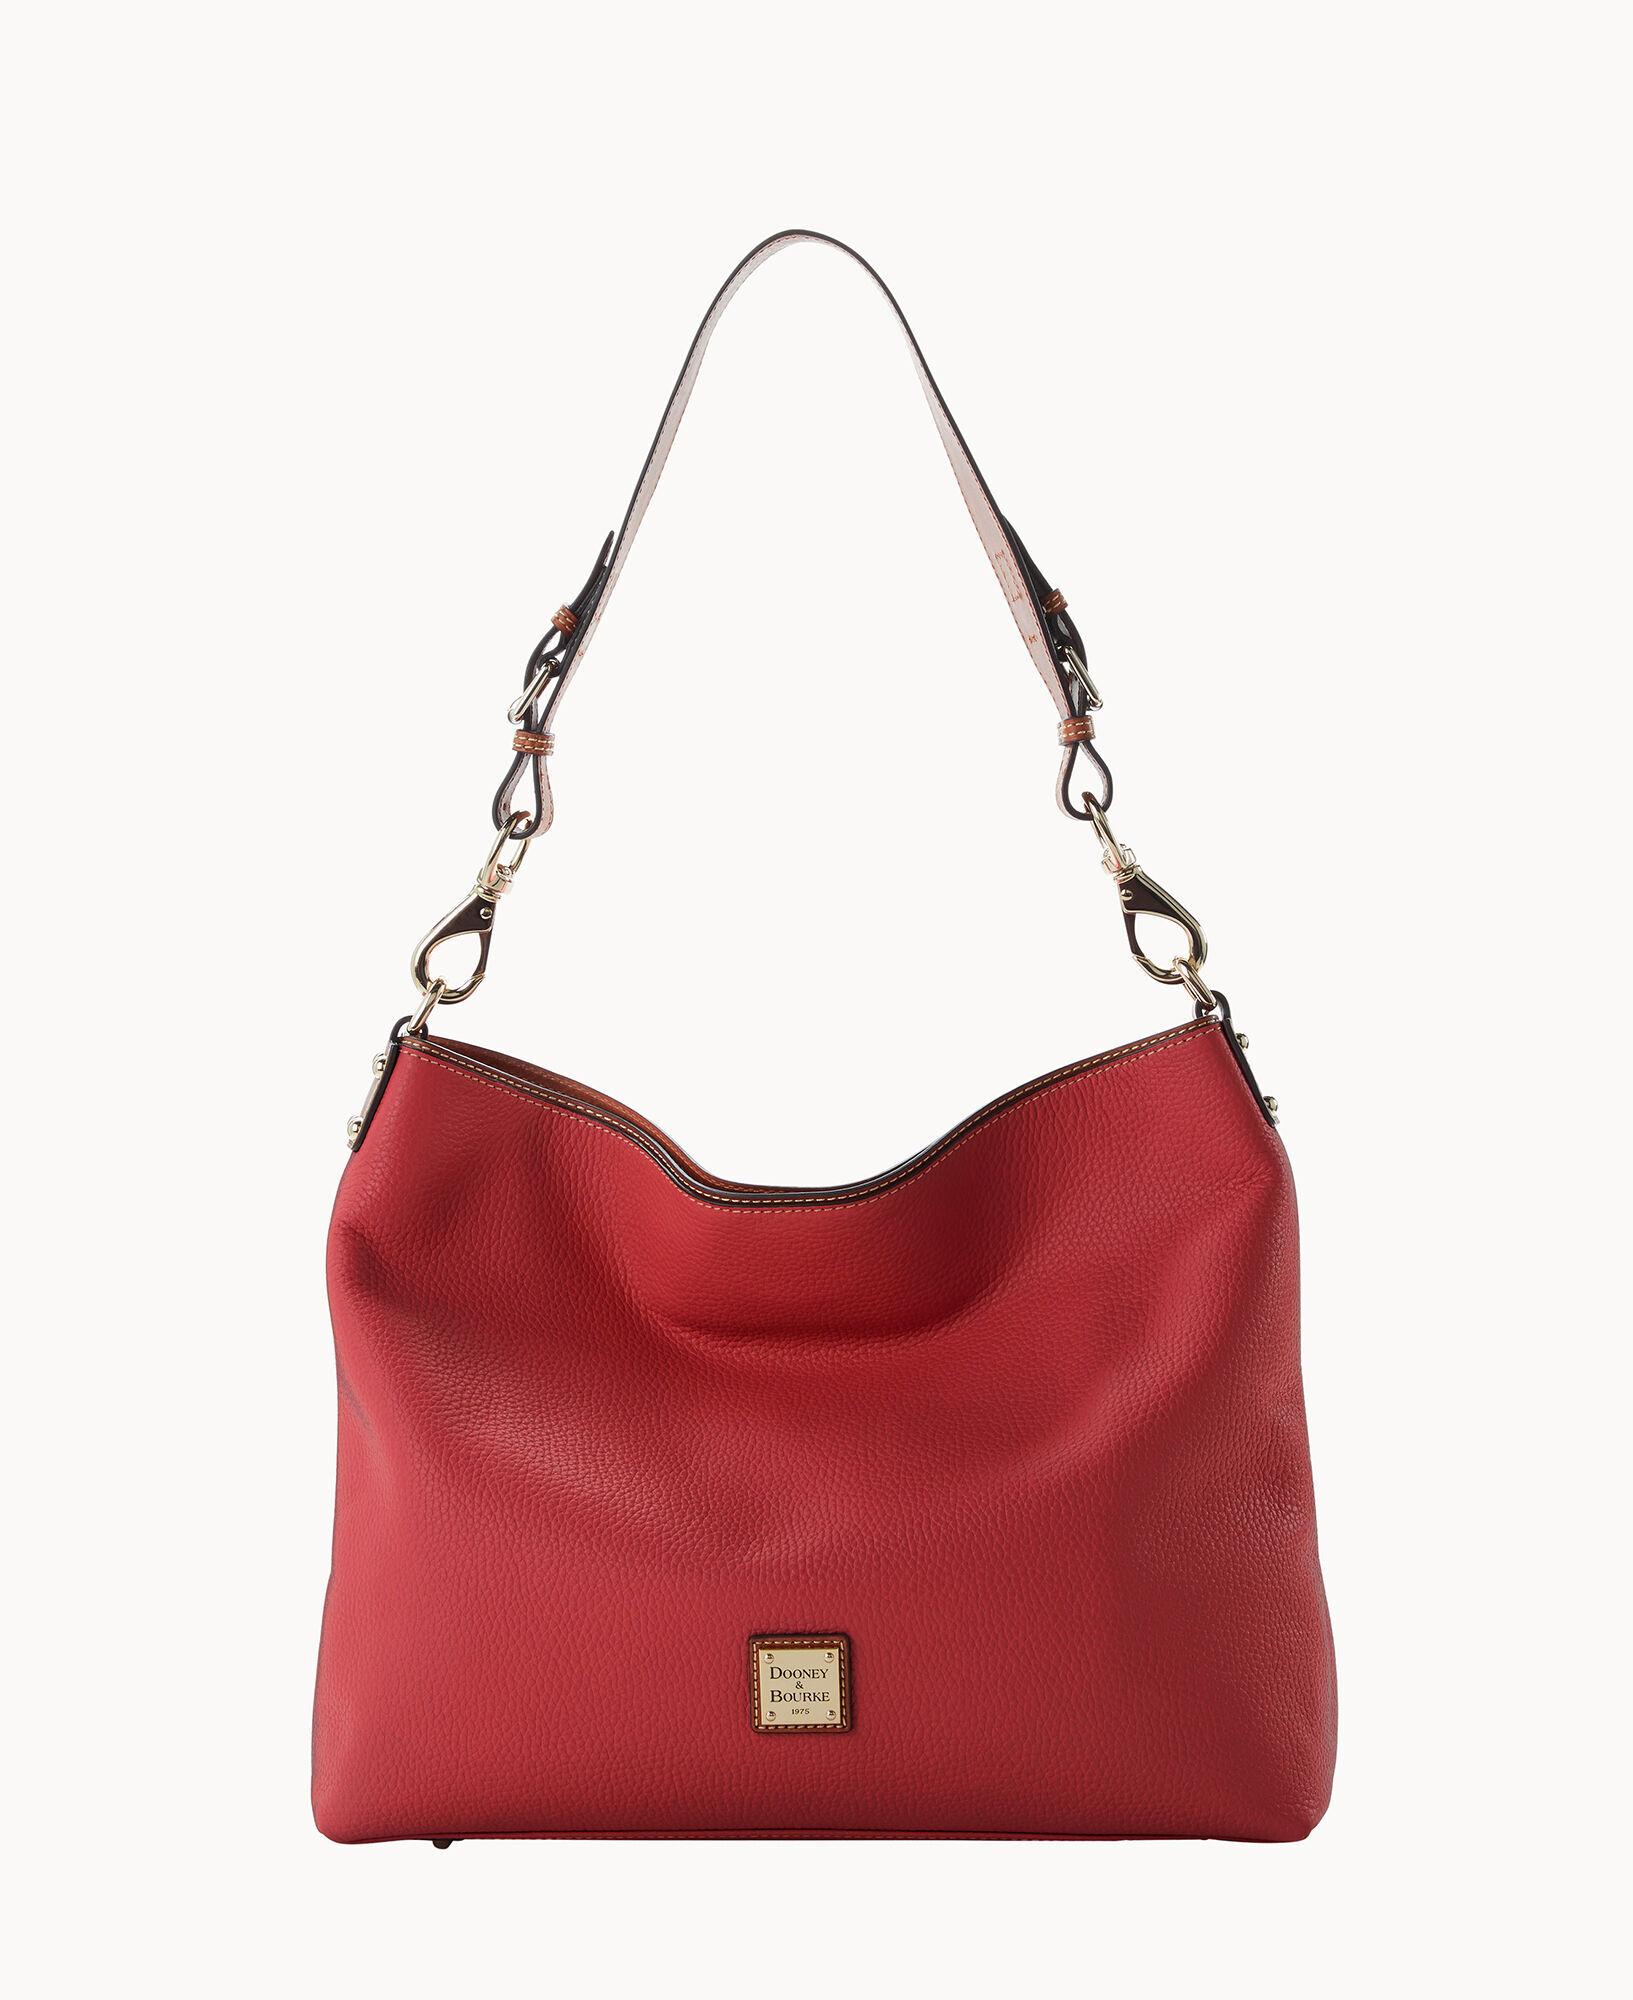 Dooney & Bourke Pebble Grain Extra Large Courtney Sac in Red | Lyst